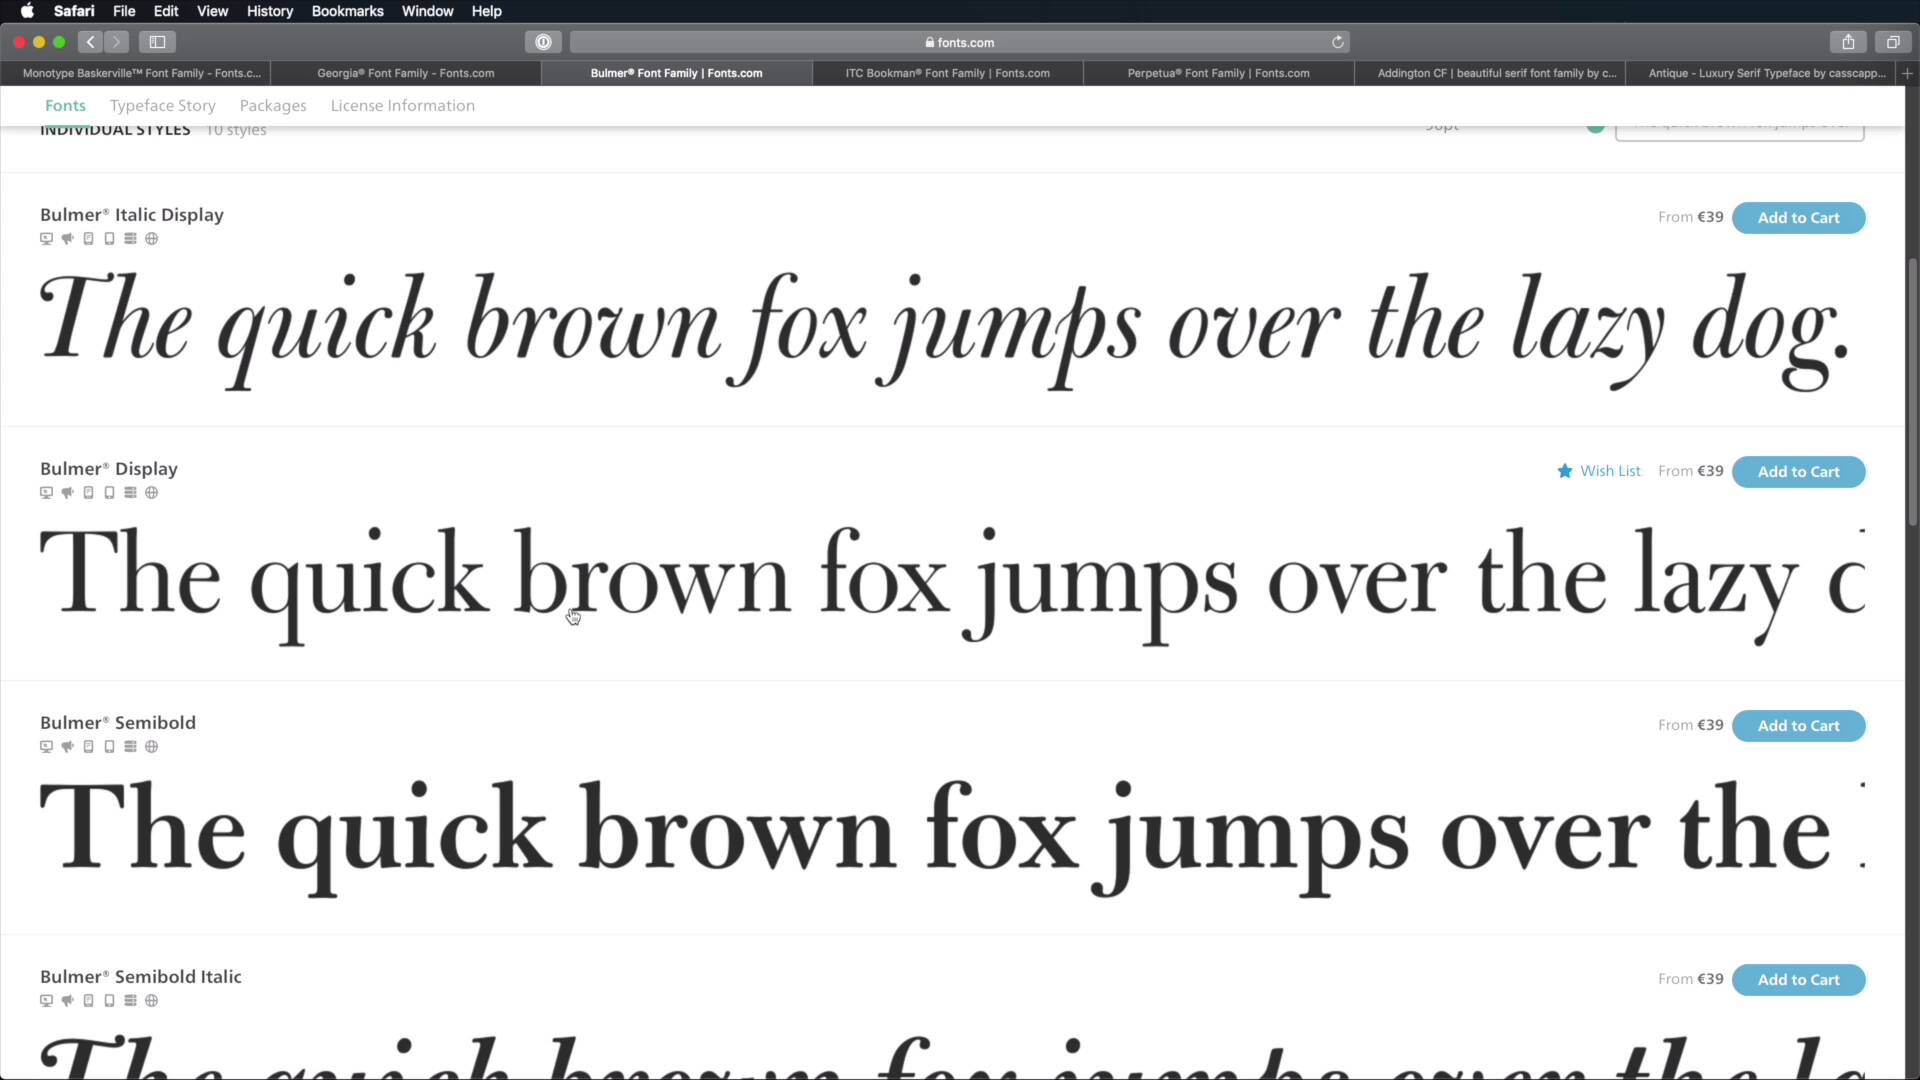 transitional typeface names